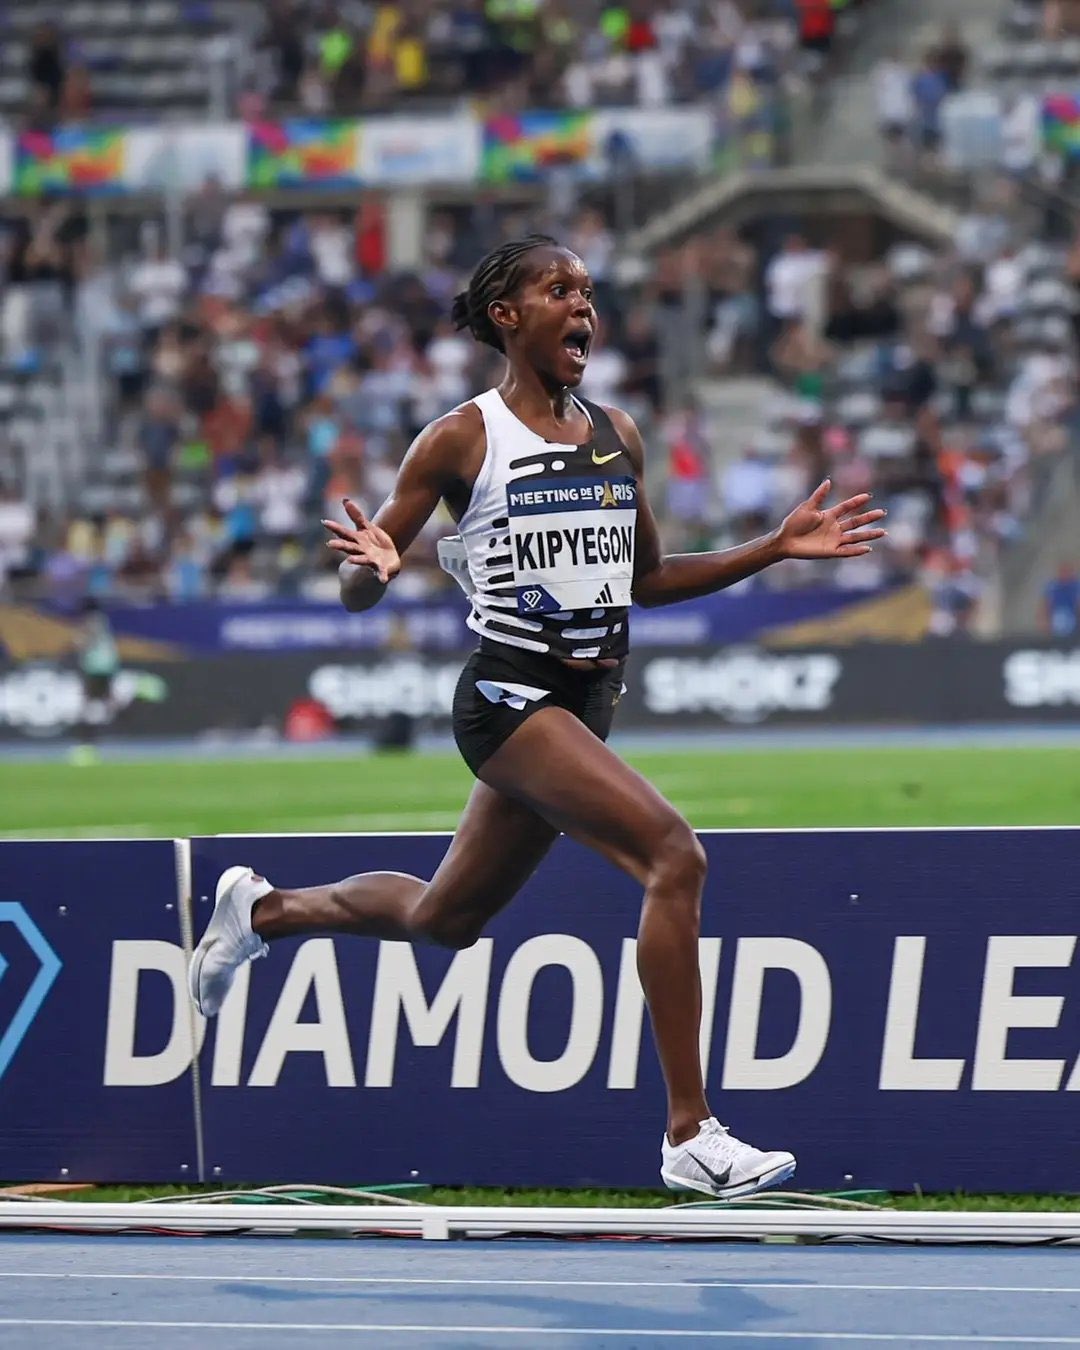 Faith Kipyegon to participate in World Athleletics Championships in Budapest, Hungaray. 